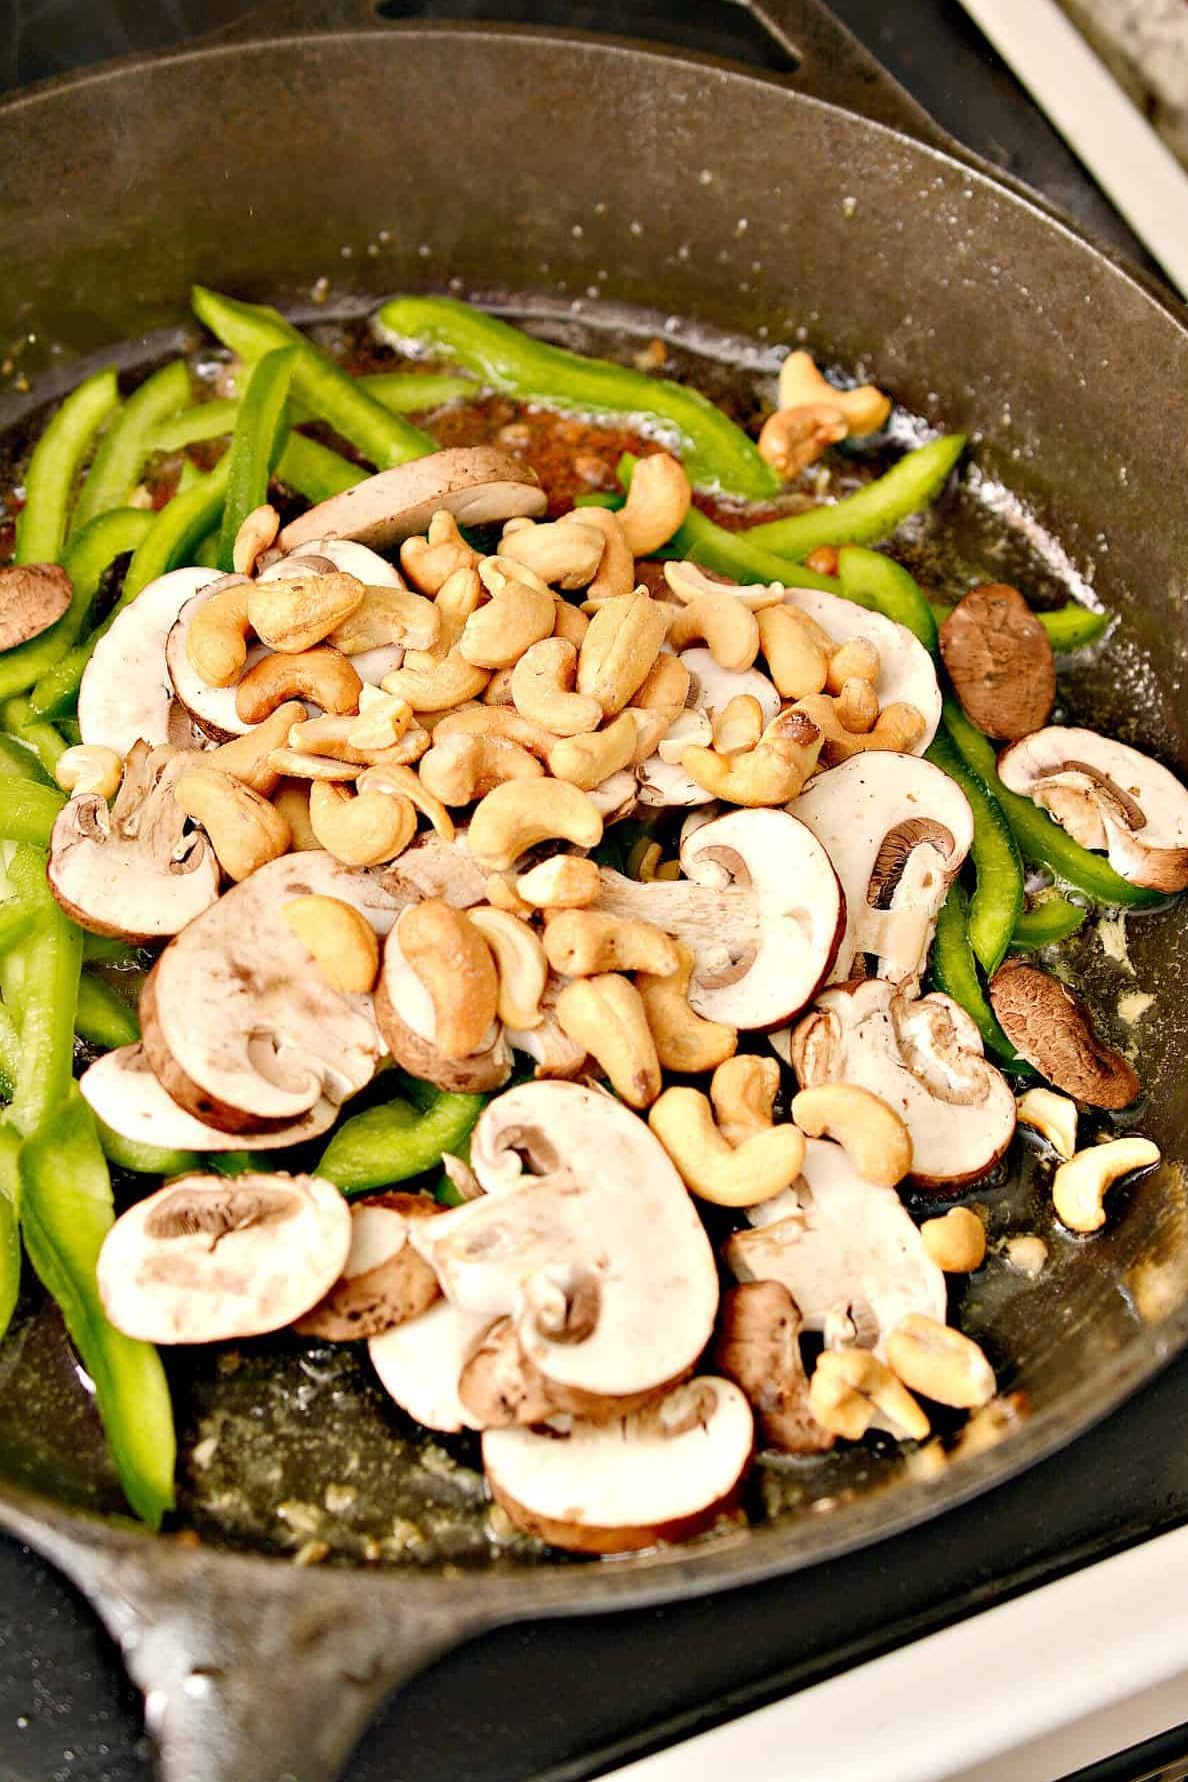 add ½ cup of cashews.